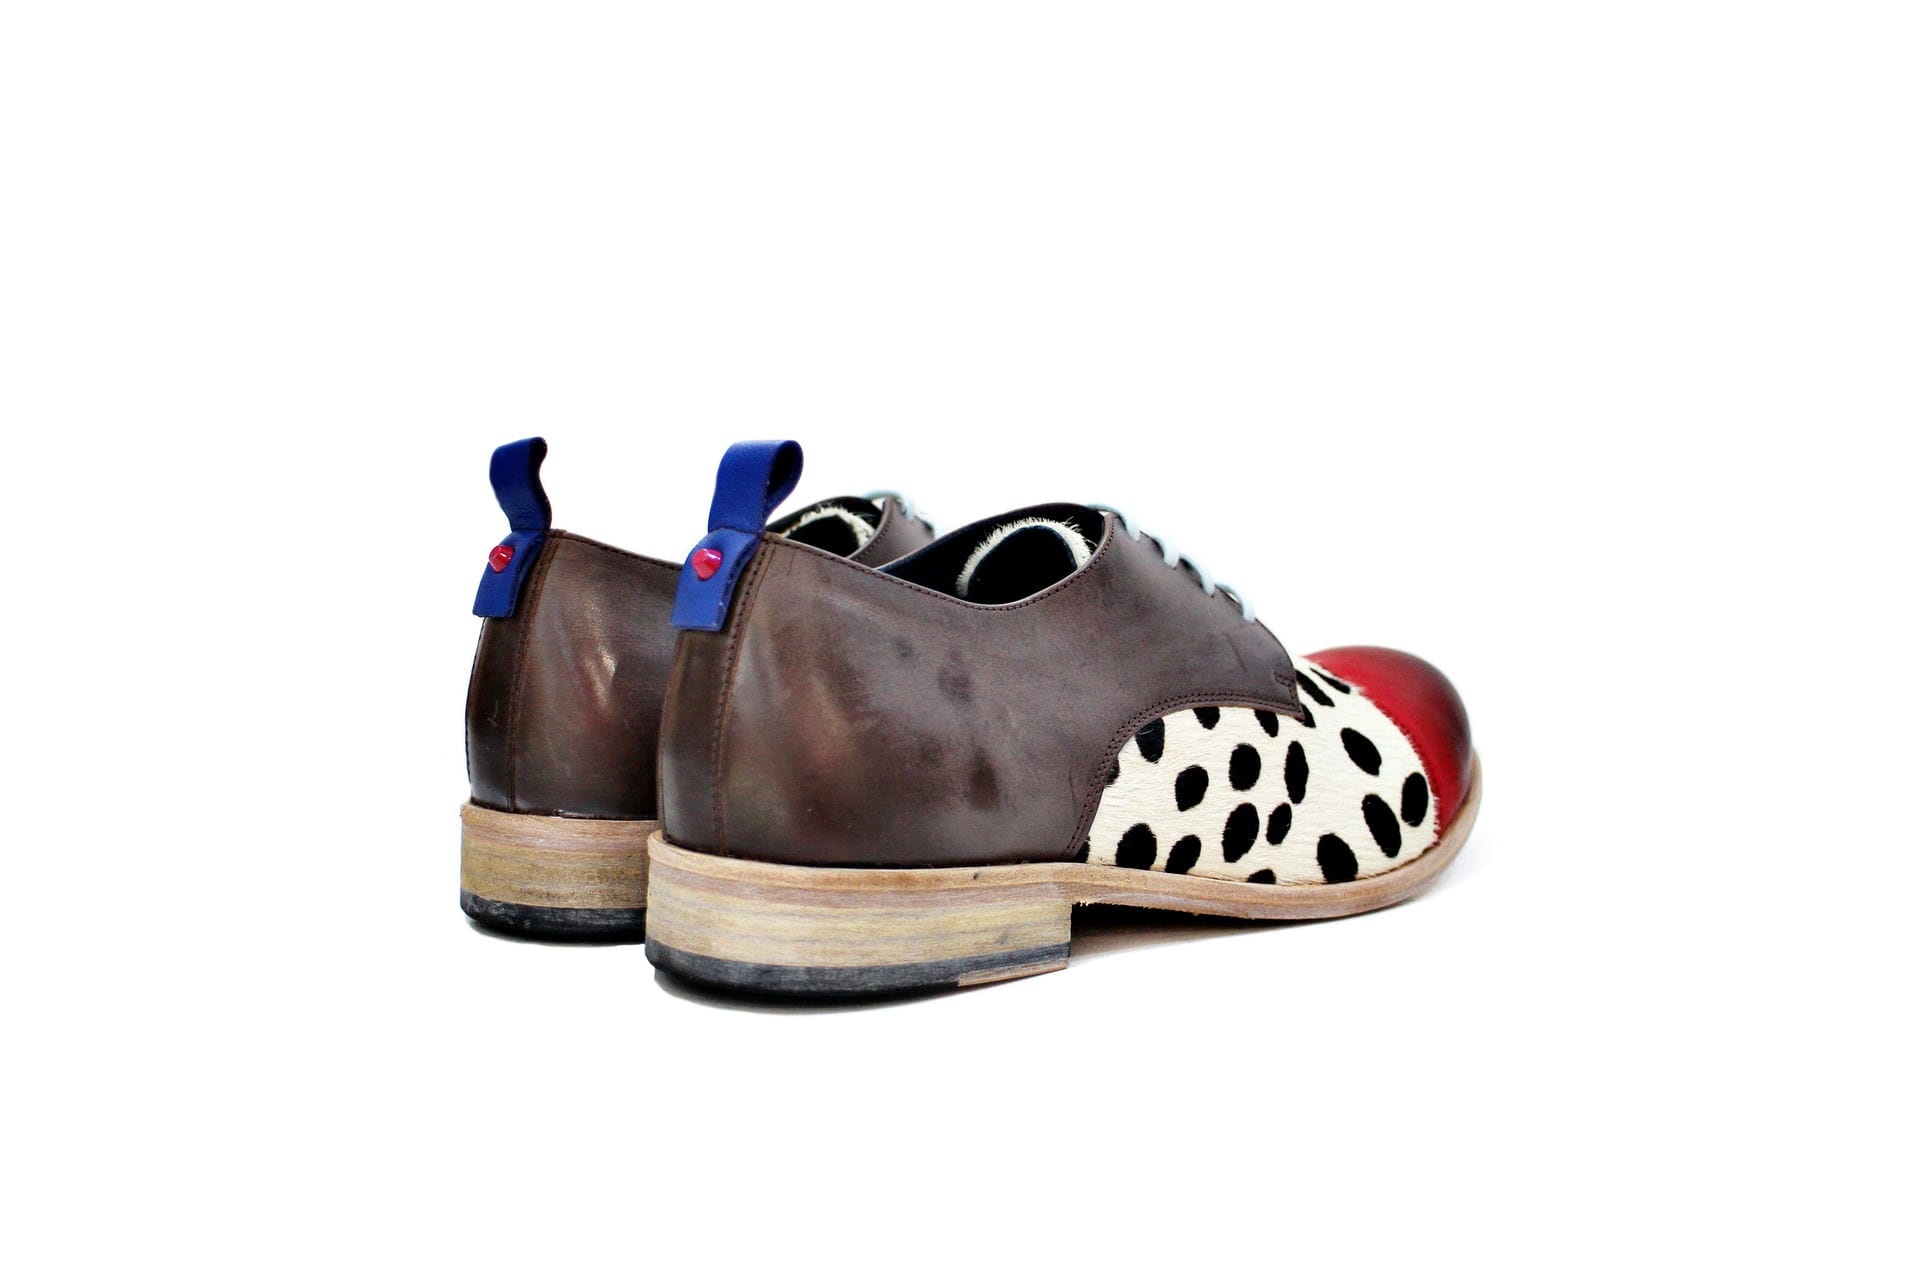 Shoe consisting of hair and leather, leather lining with leather sole. Handmade in Portugal “Walk with Pintta